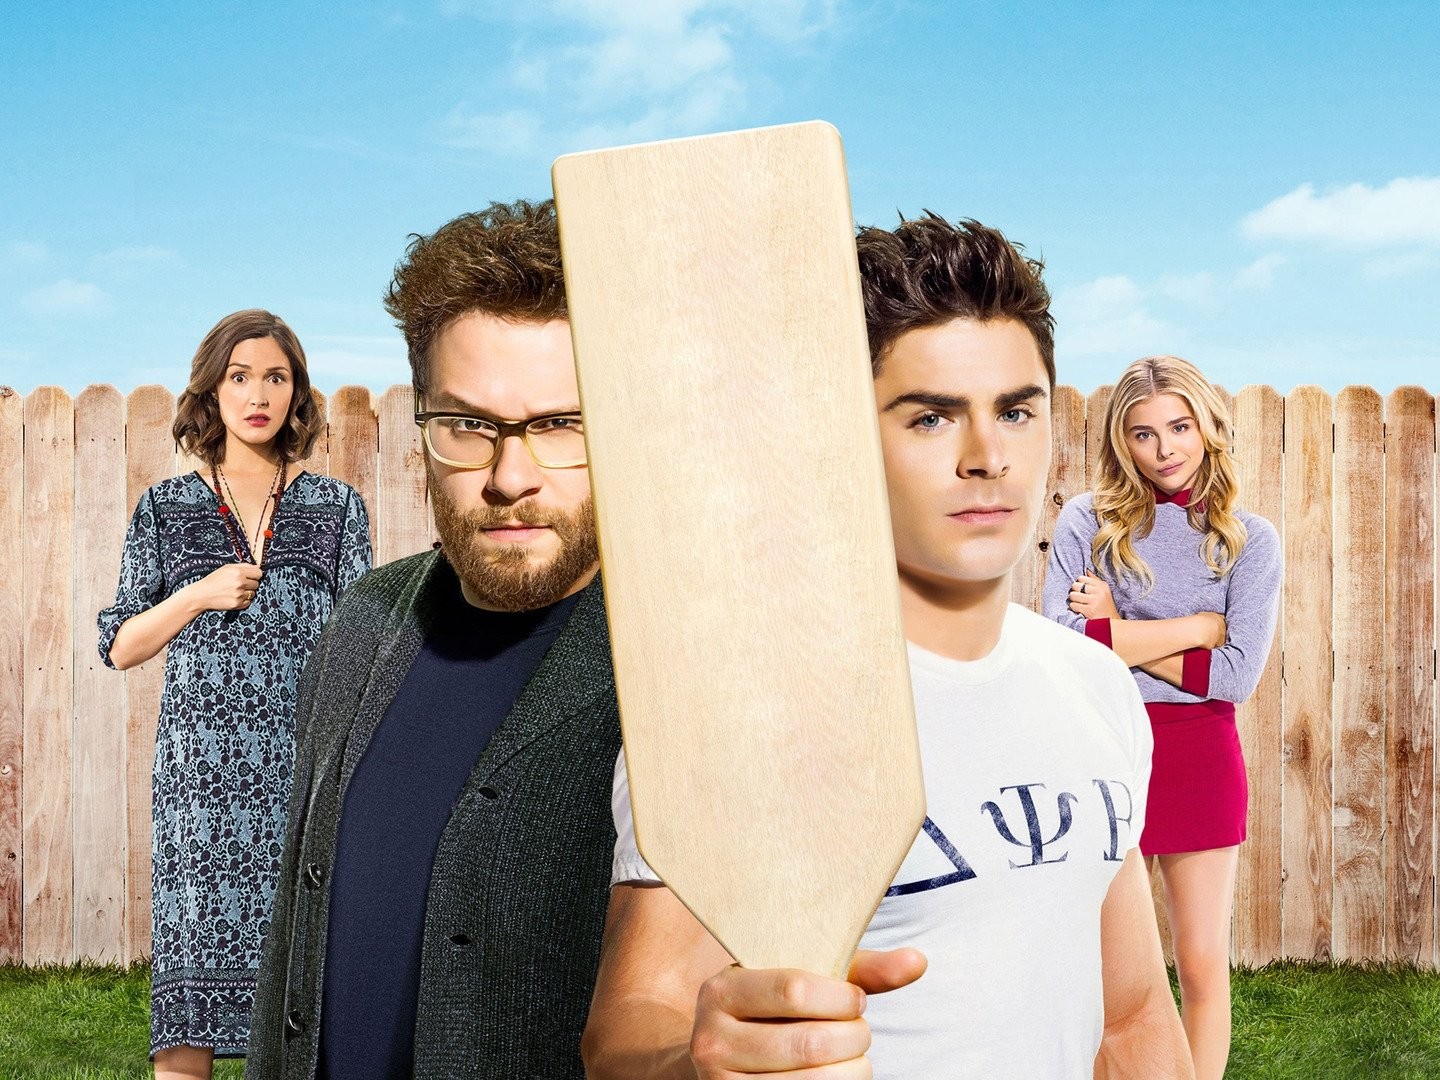 Film review: Bad Neighbours 2 – Seth Rogen, Zac Efron battle sorority  sisters in frat-party sequel